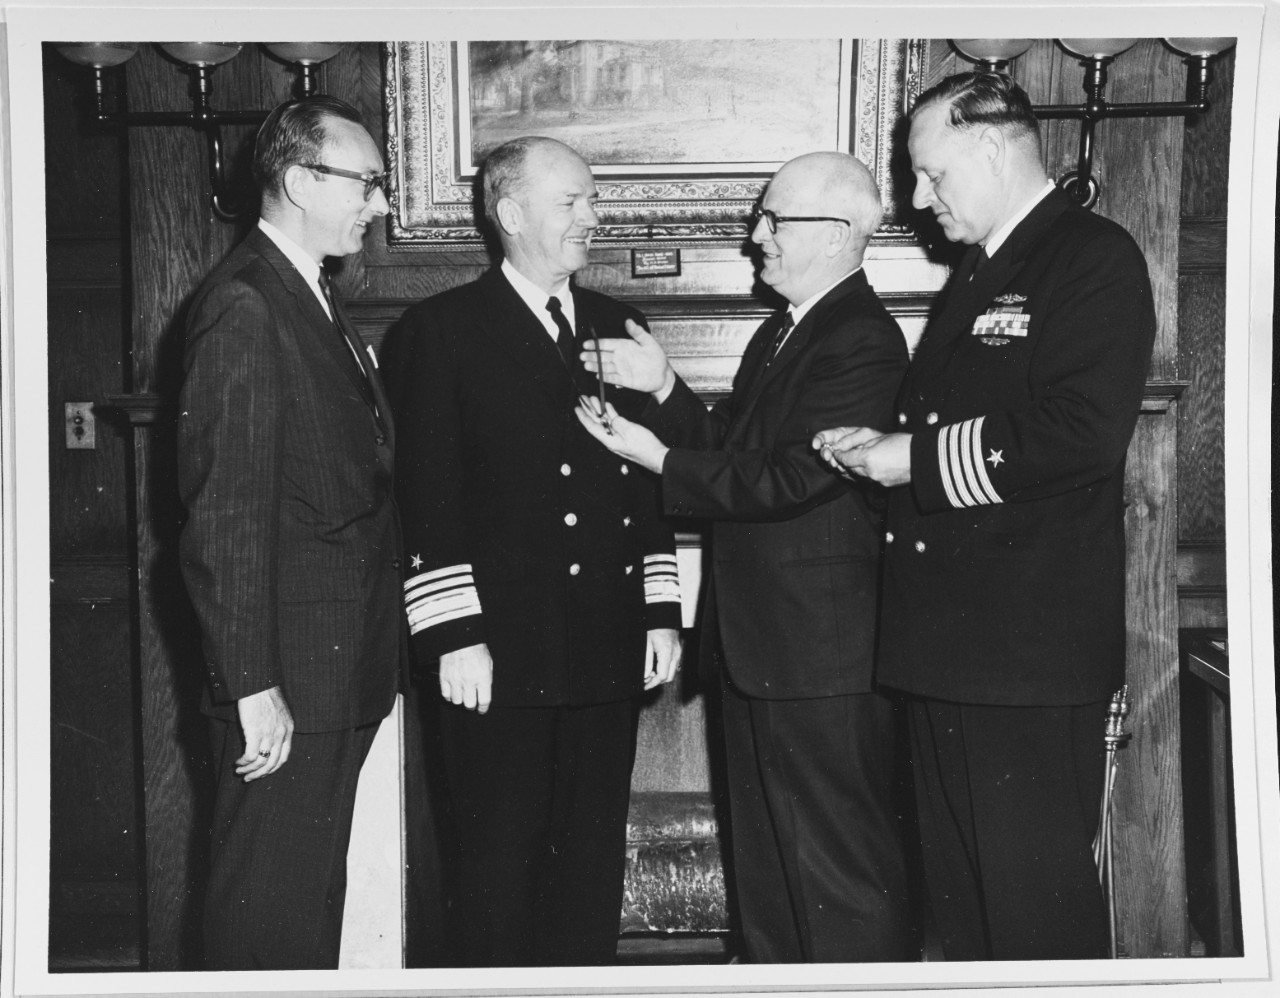 Mr. Watt, Vice Admiral Taylor, Council Chairman and Captain Kimmel at USS PORTLAND Memorial ceremony, July 4, 1962